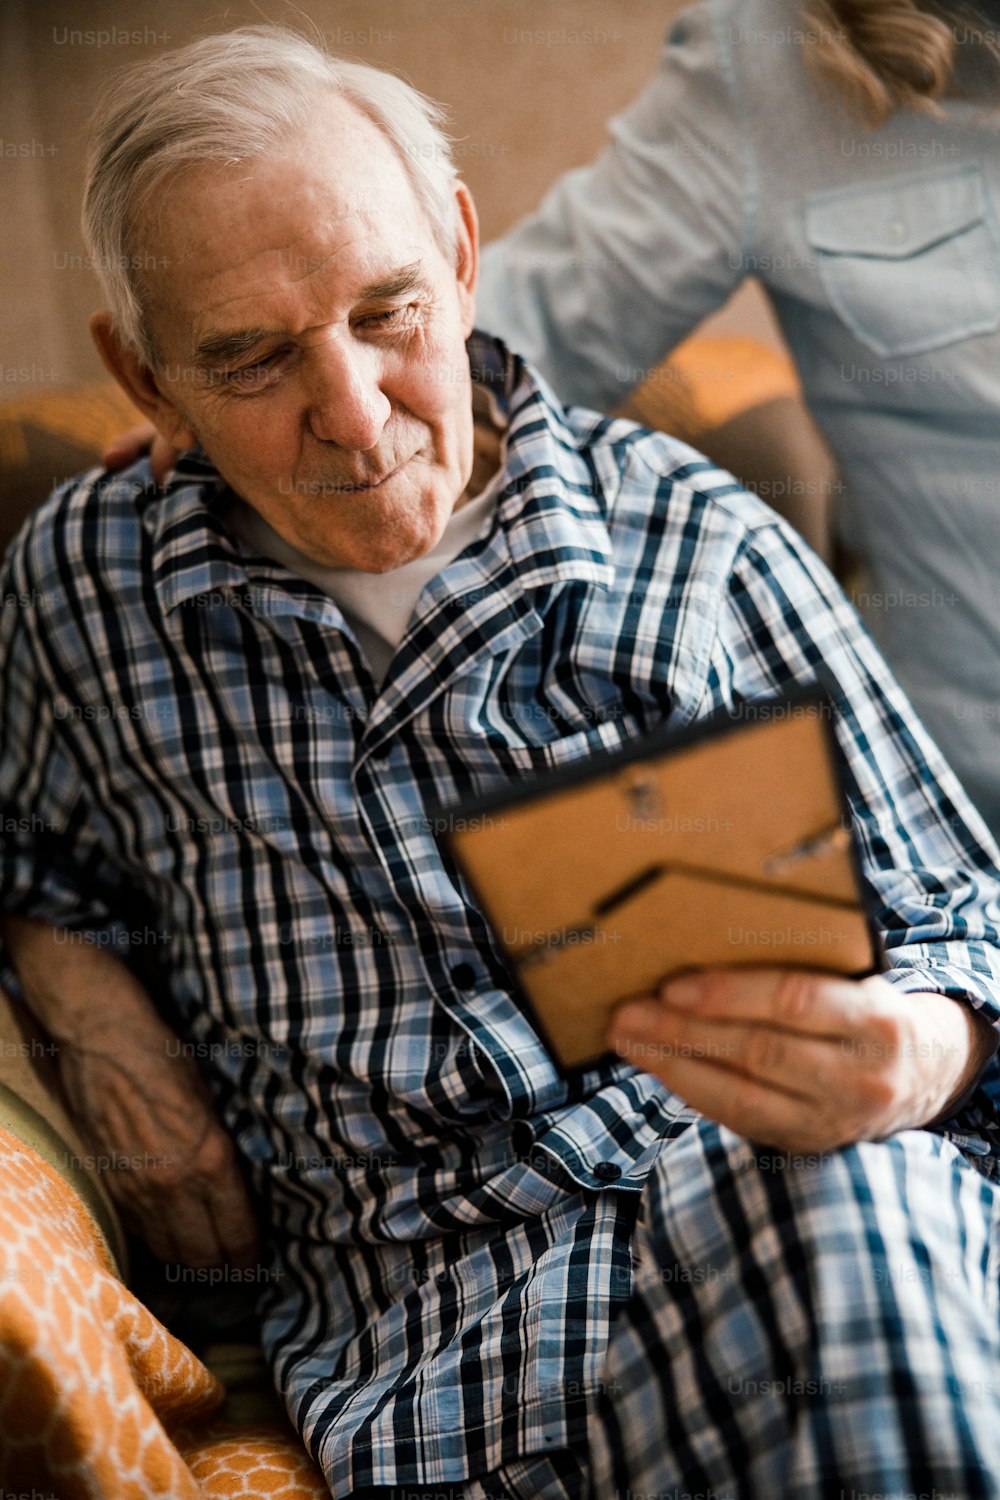 Portrait of glad elderly man looking at the photo in the frame. His wife is standing behind him and smiling